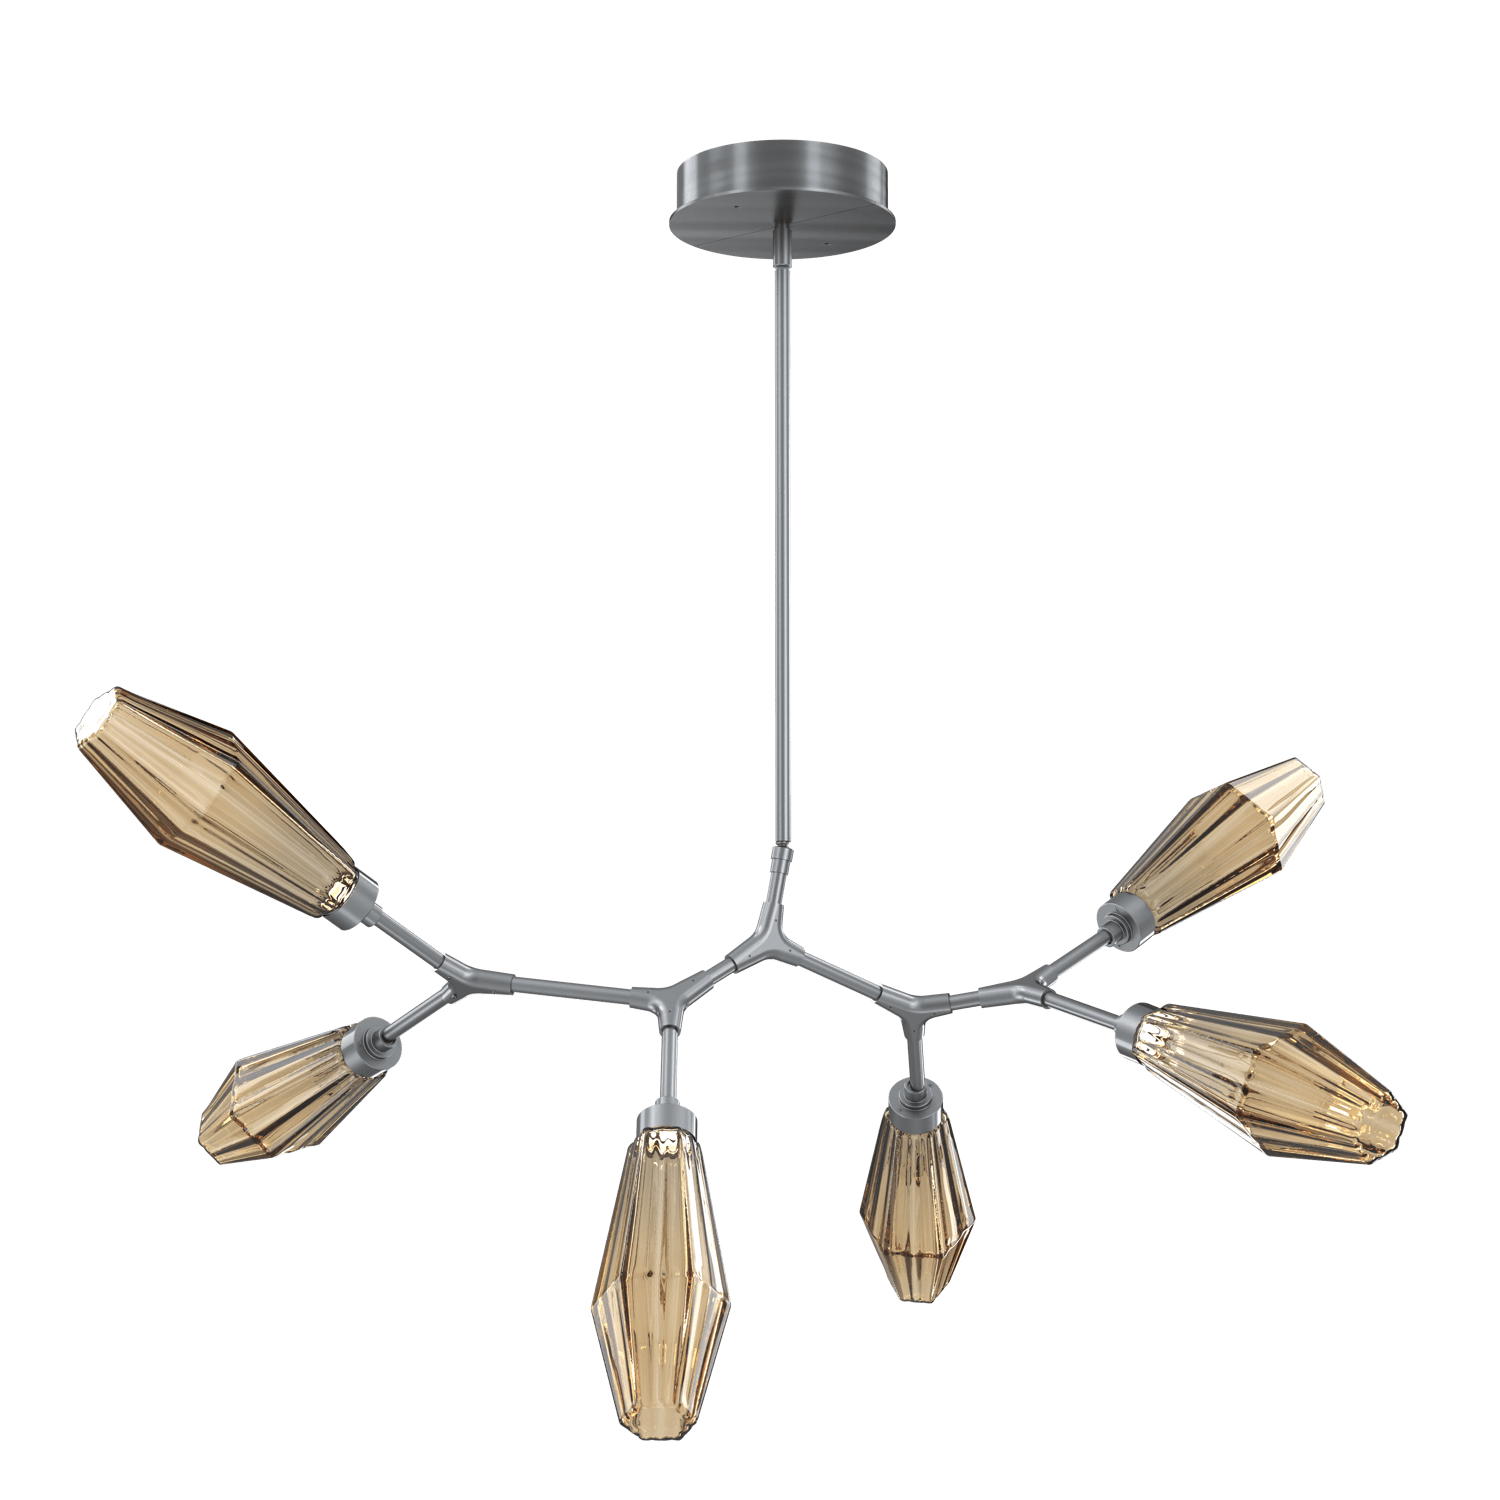 PLB0049-BA-GM-RB-Hammerton-Studio-Aalto-6-light-modern-branch-chandelier-with-gunmetal-finish-and-optic-ribbed-bronze-glass-shades-and-LED-lamping